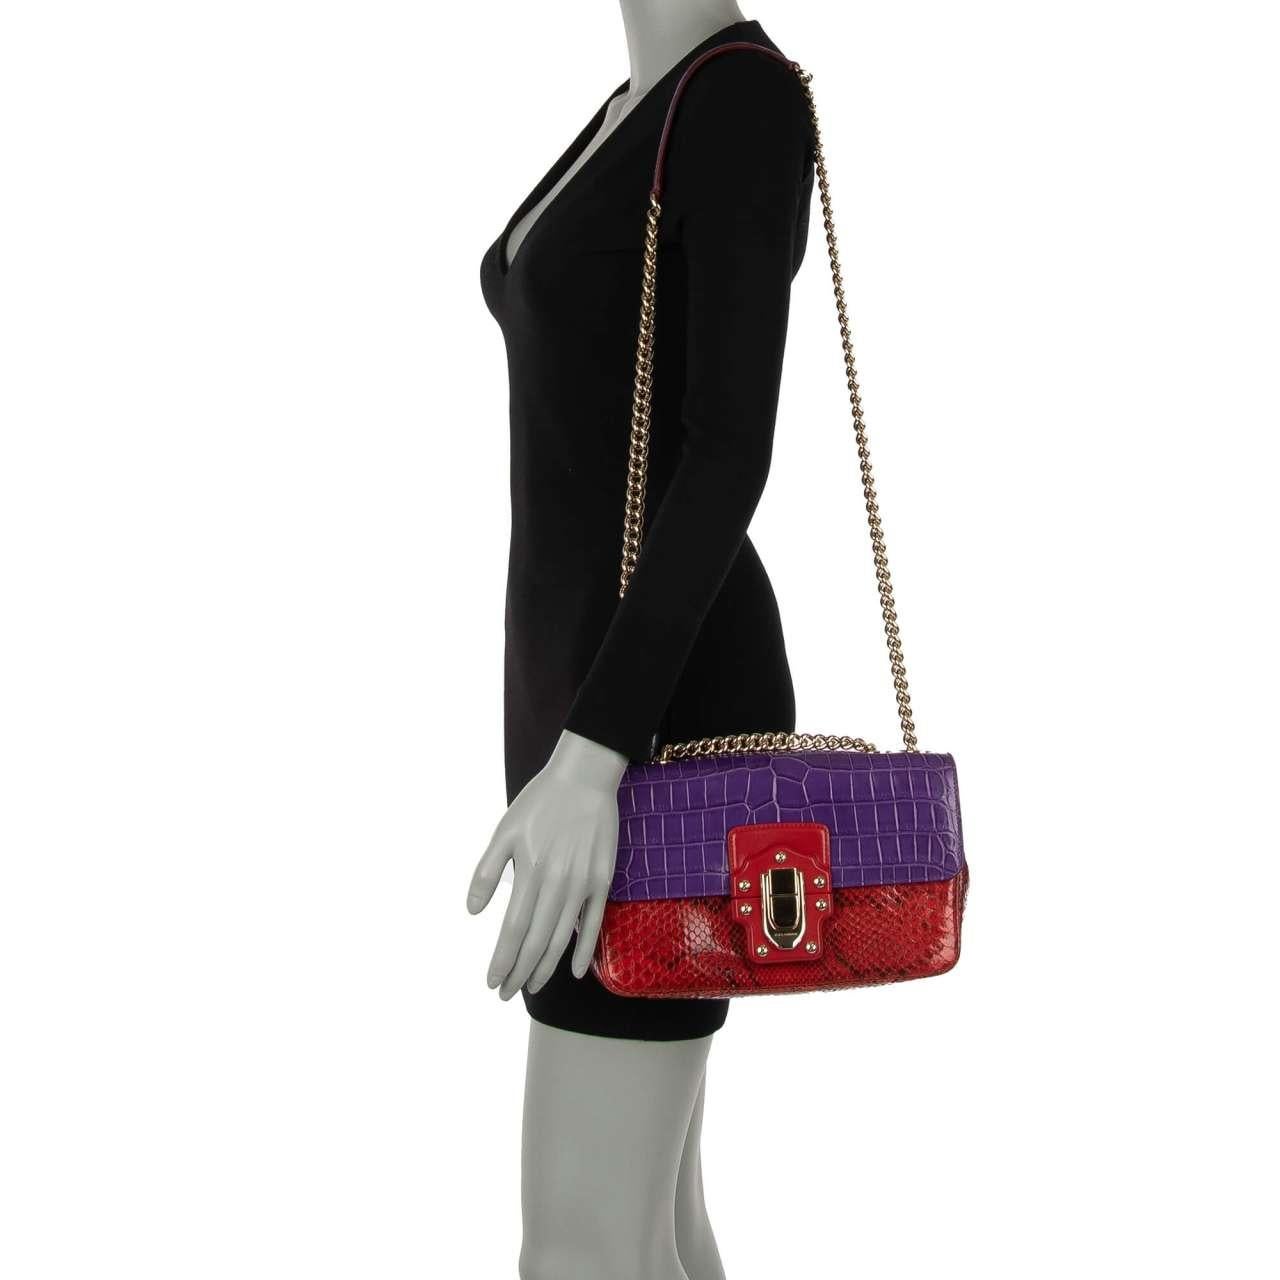 D&G Croco Snake Leather Shoulder Bag LUCIA with Chain Strap Red Purple For Sale 4